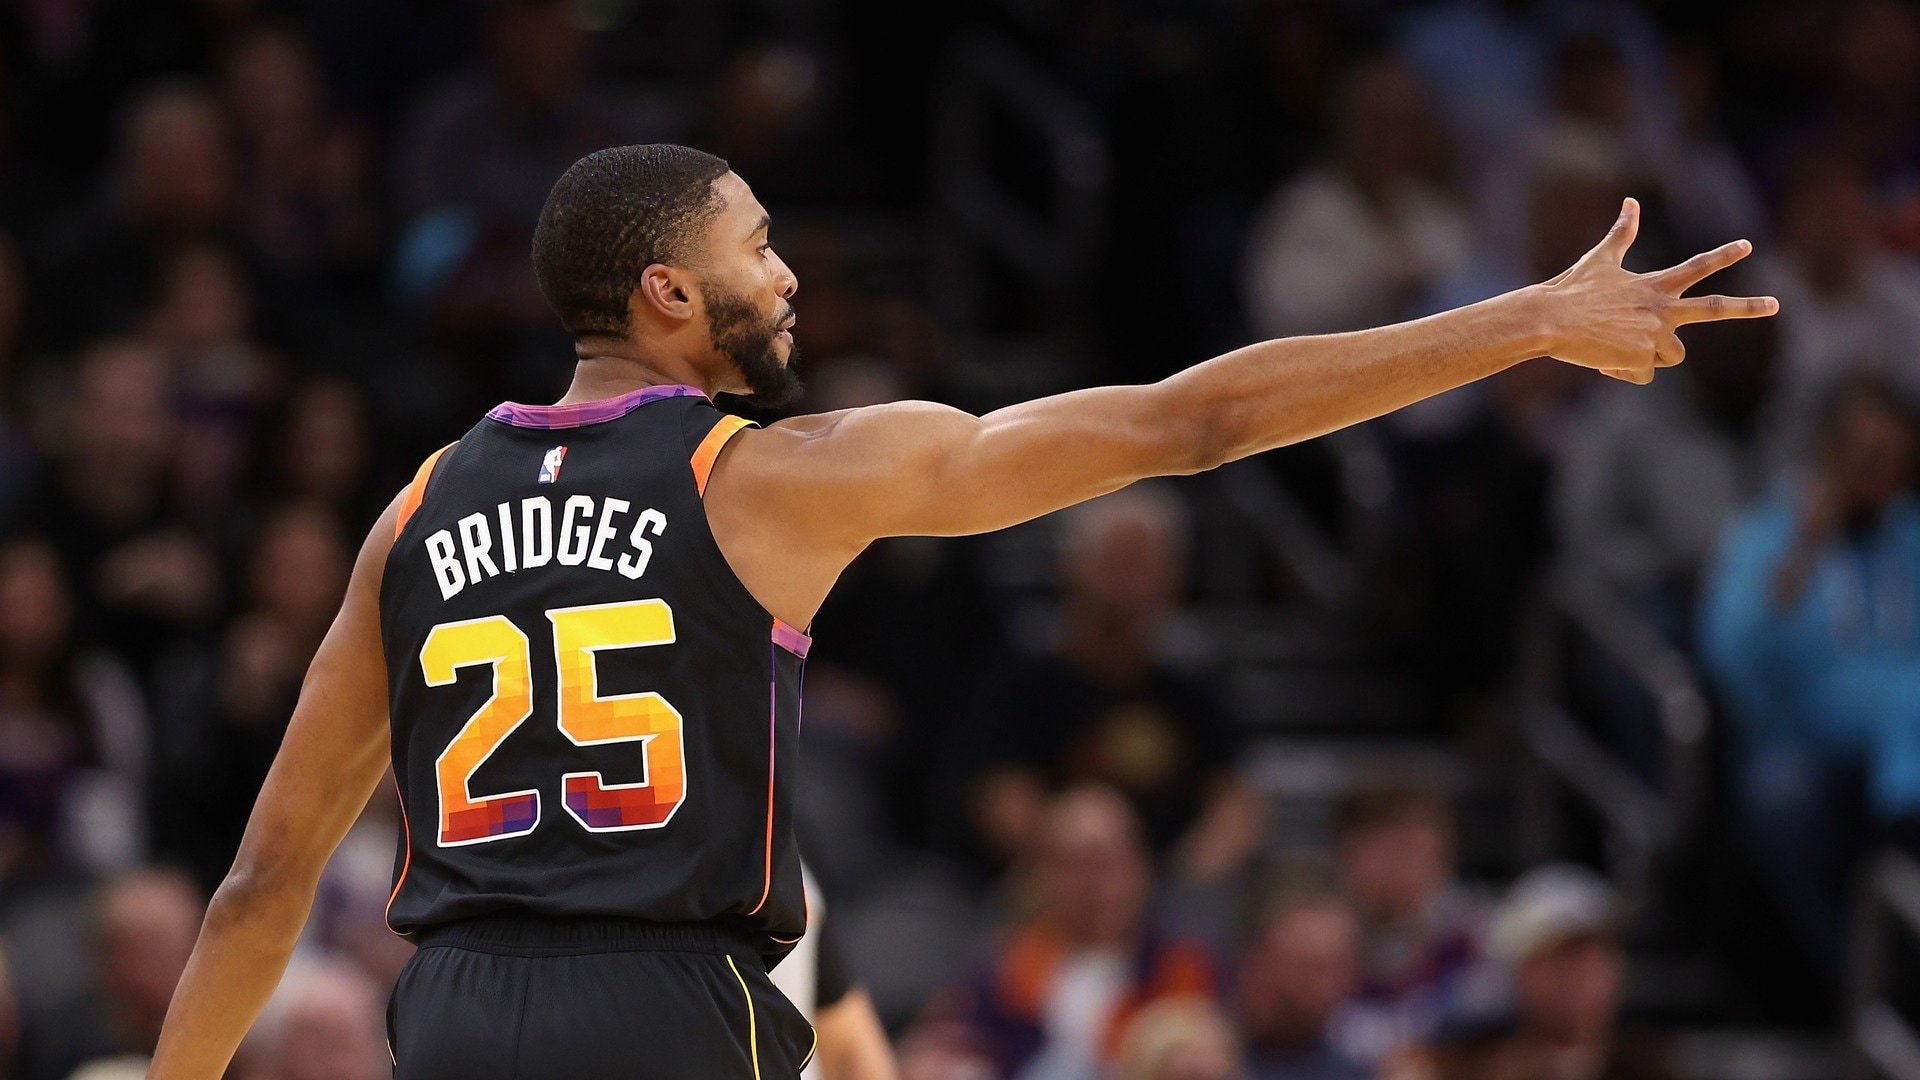 The Constantly Evolving and Improving Skillset of Mikal Bridges